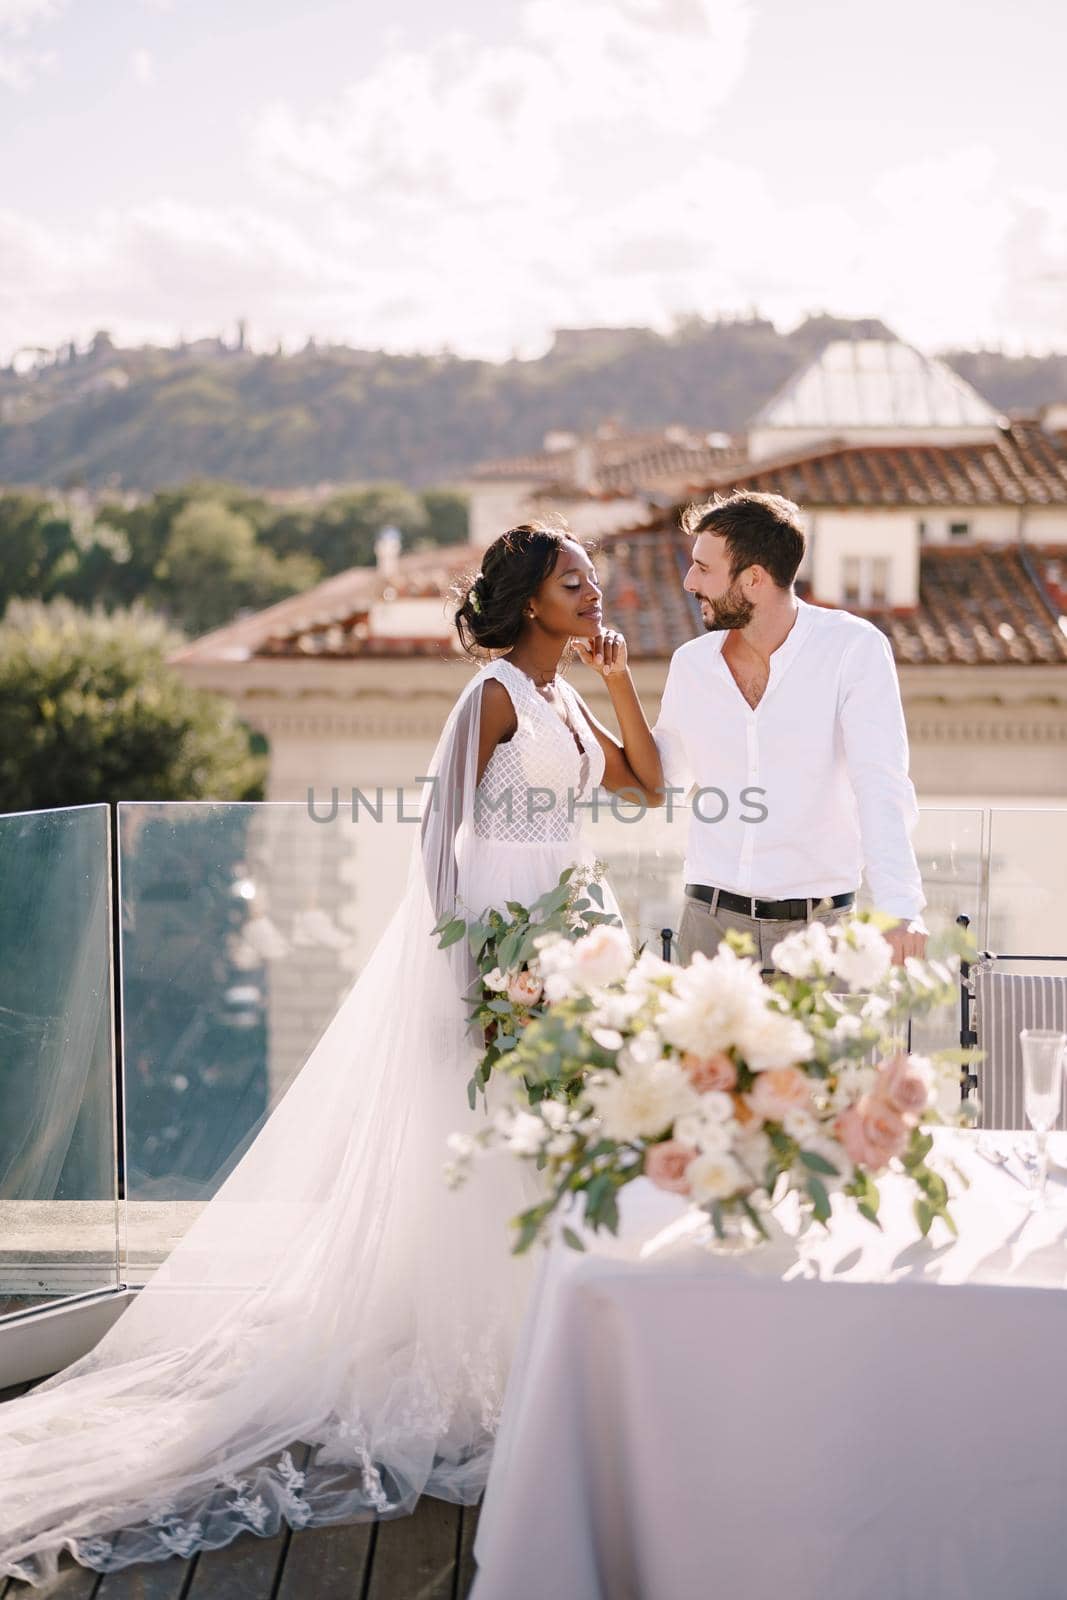 Interracial wedding couple. Destination fine-art wedding in Florence, Italy. African-American bride and Caucasian groom stand near the table for wedding dinner